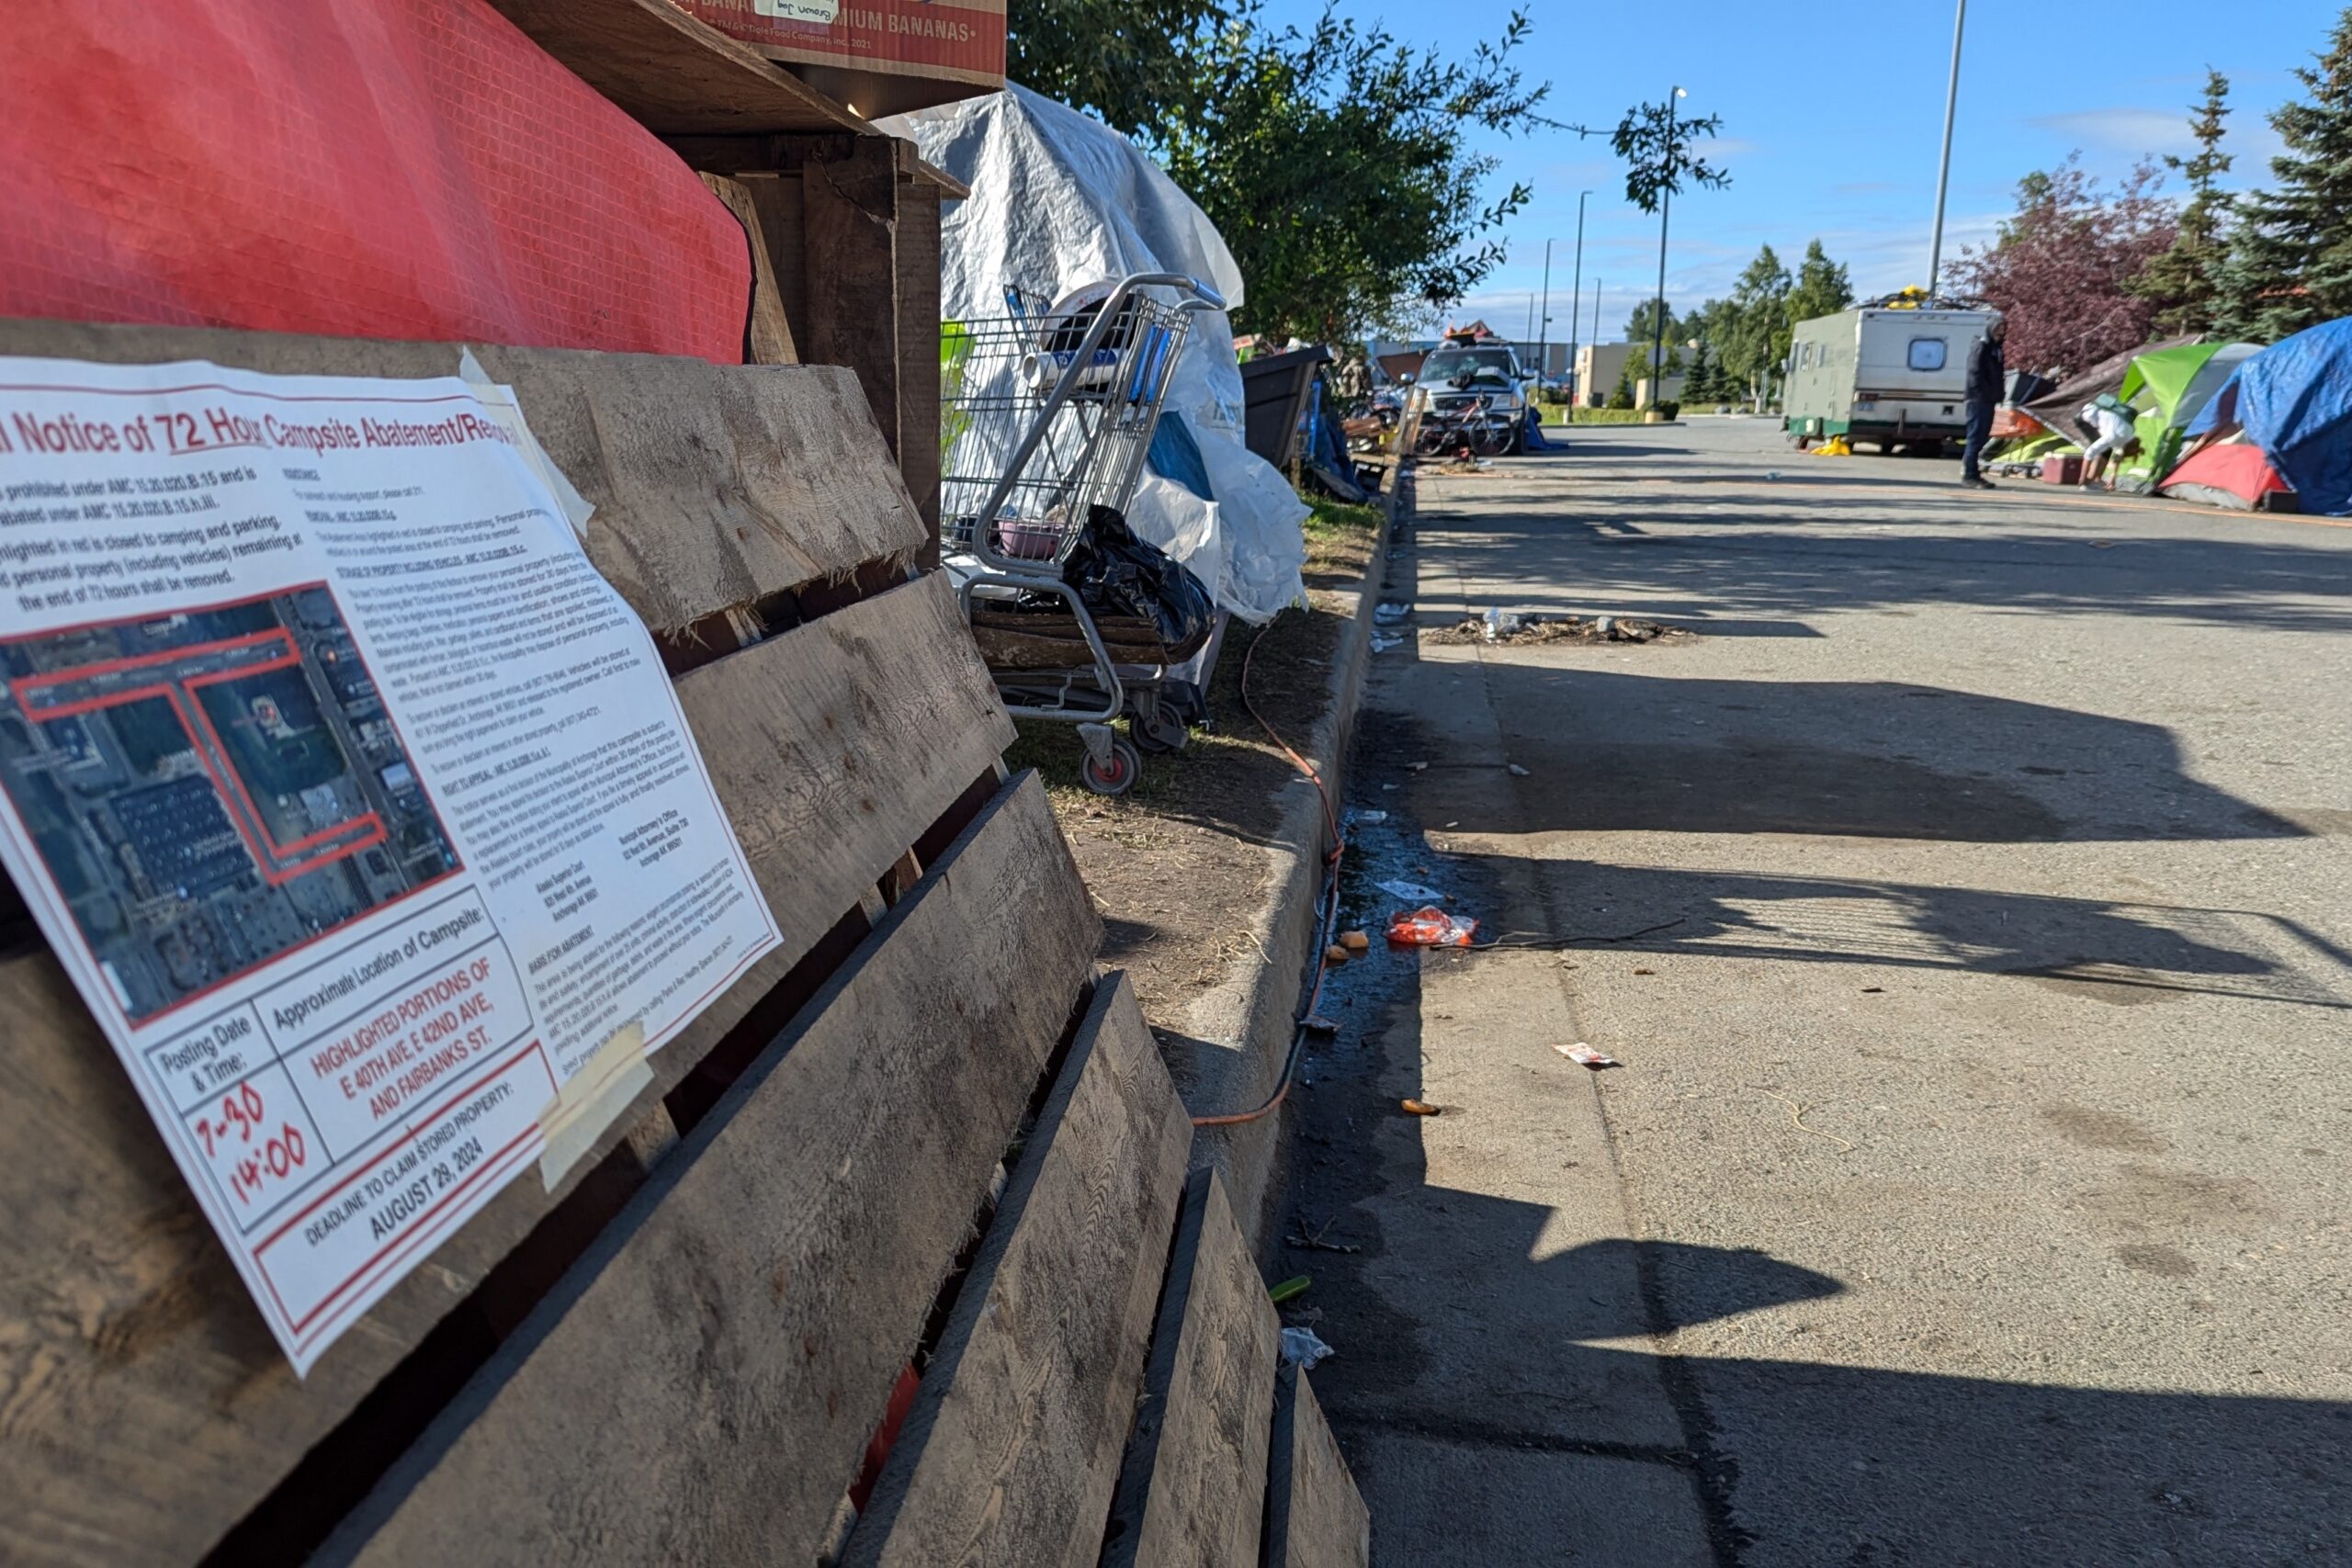 An abatement notice is taped to a wooden pallet leaning against a makeshift shelter on a street with many makeshift shelters